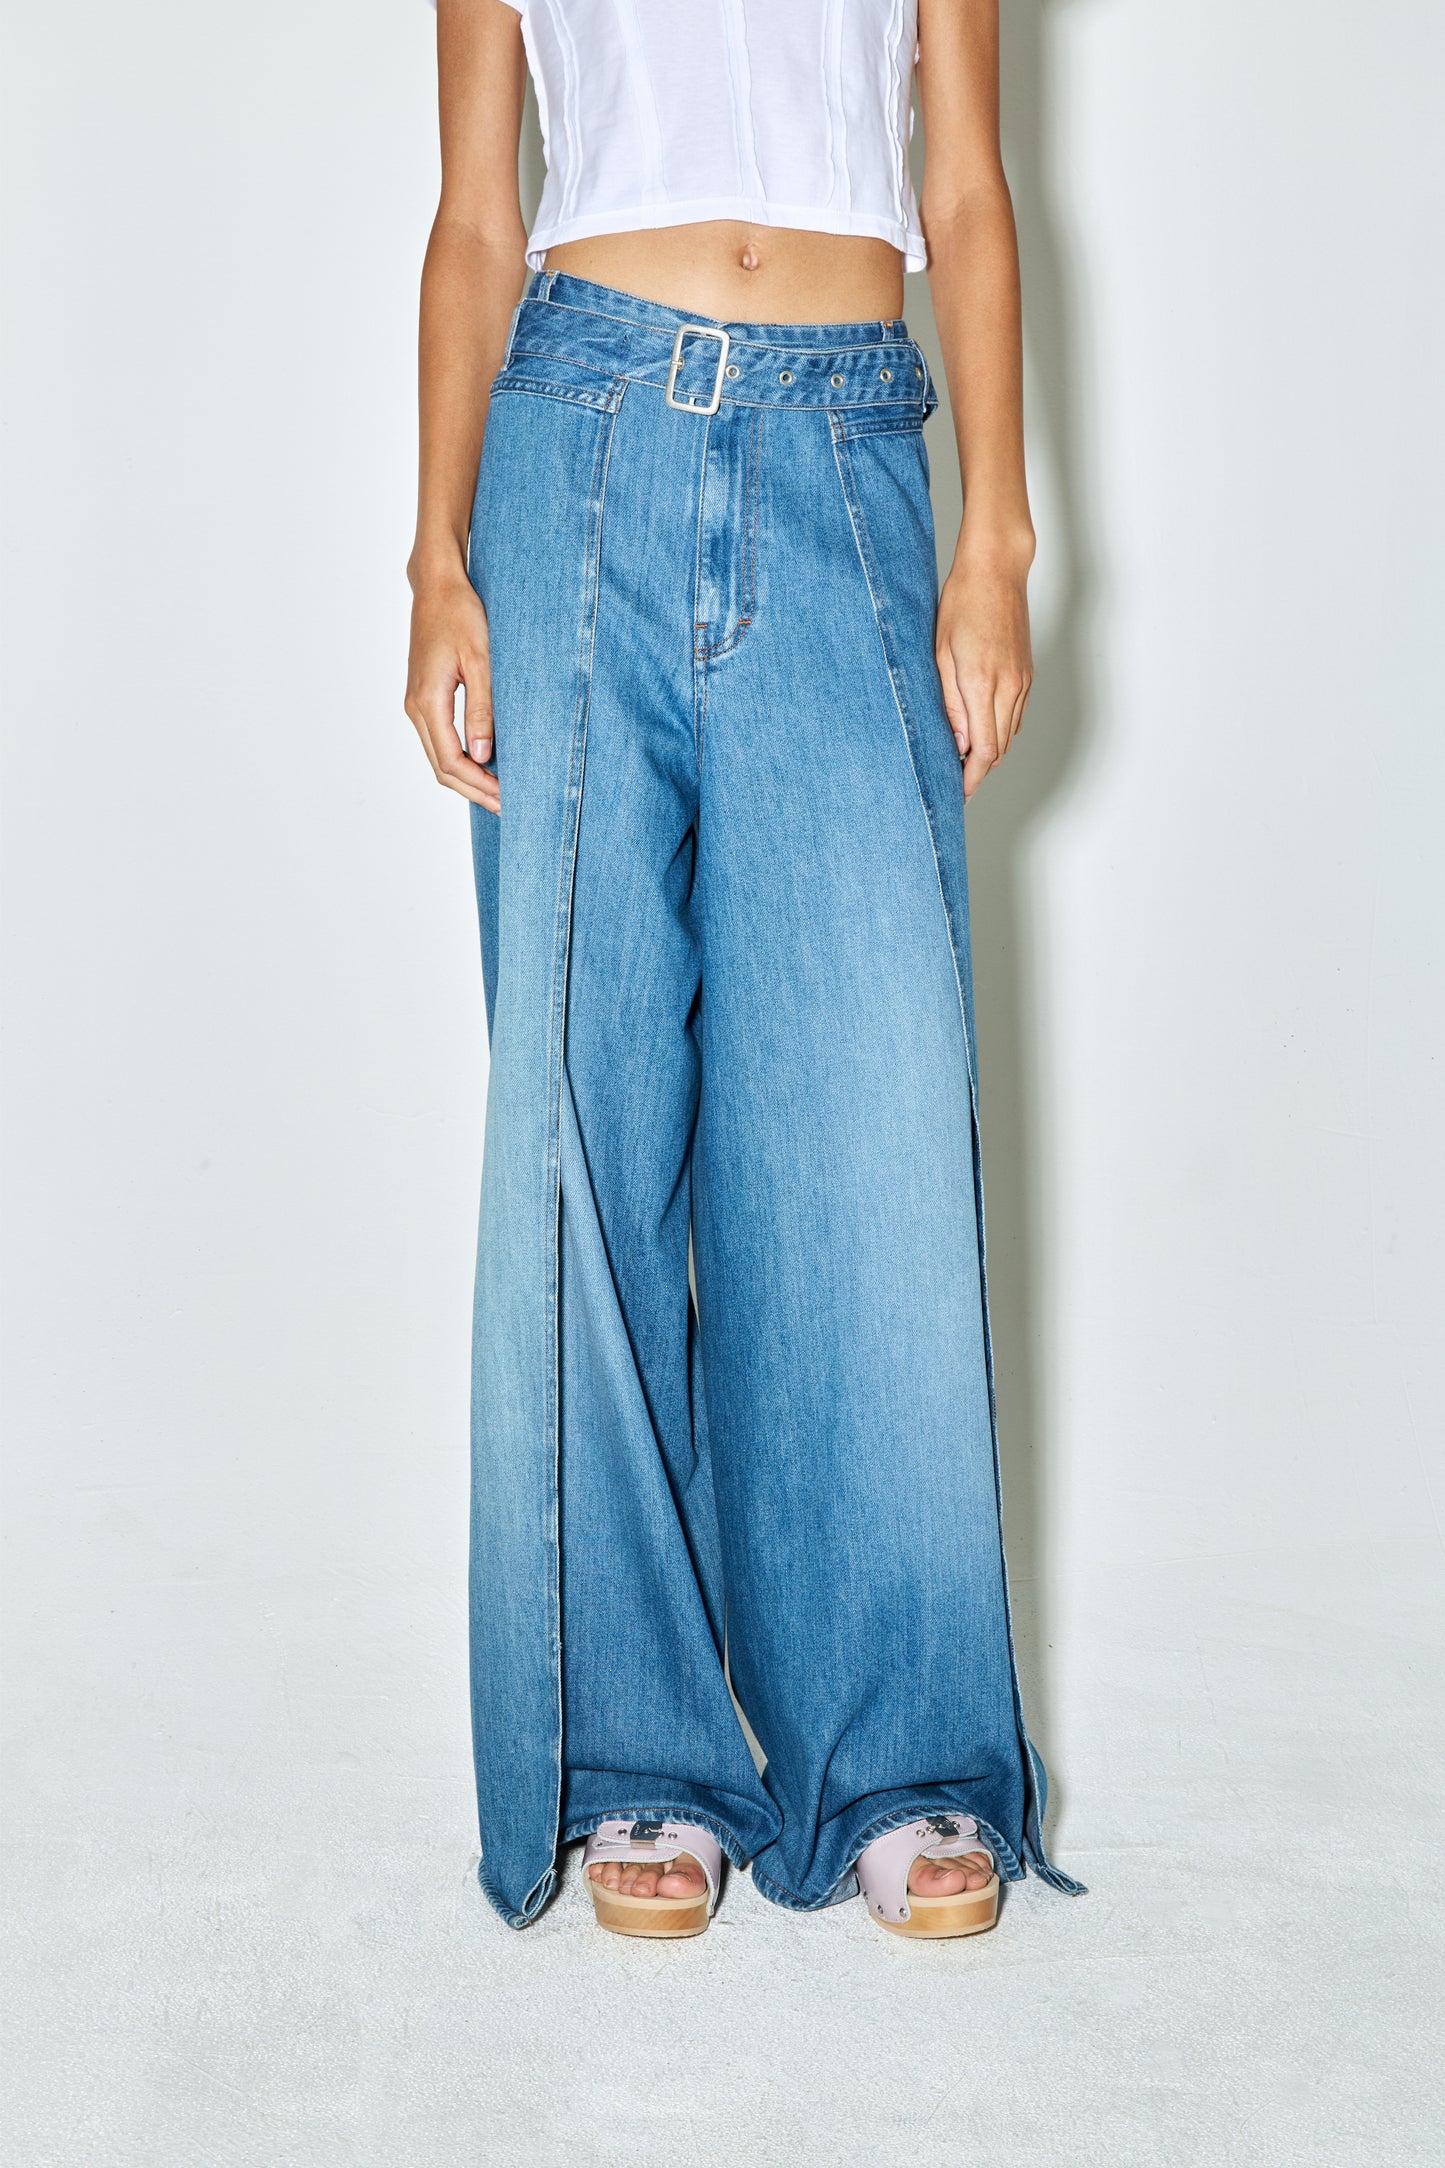 Façonnable Faconnable Jeans Size 12 Womens Blue Denim Pants Wide Leg High  Rise Jeans Casual - $32 - From Javier